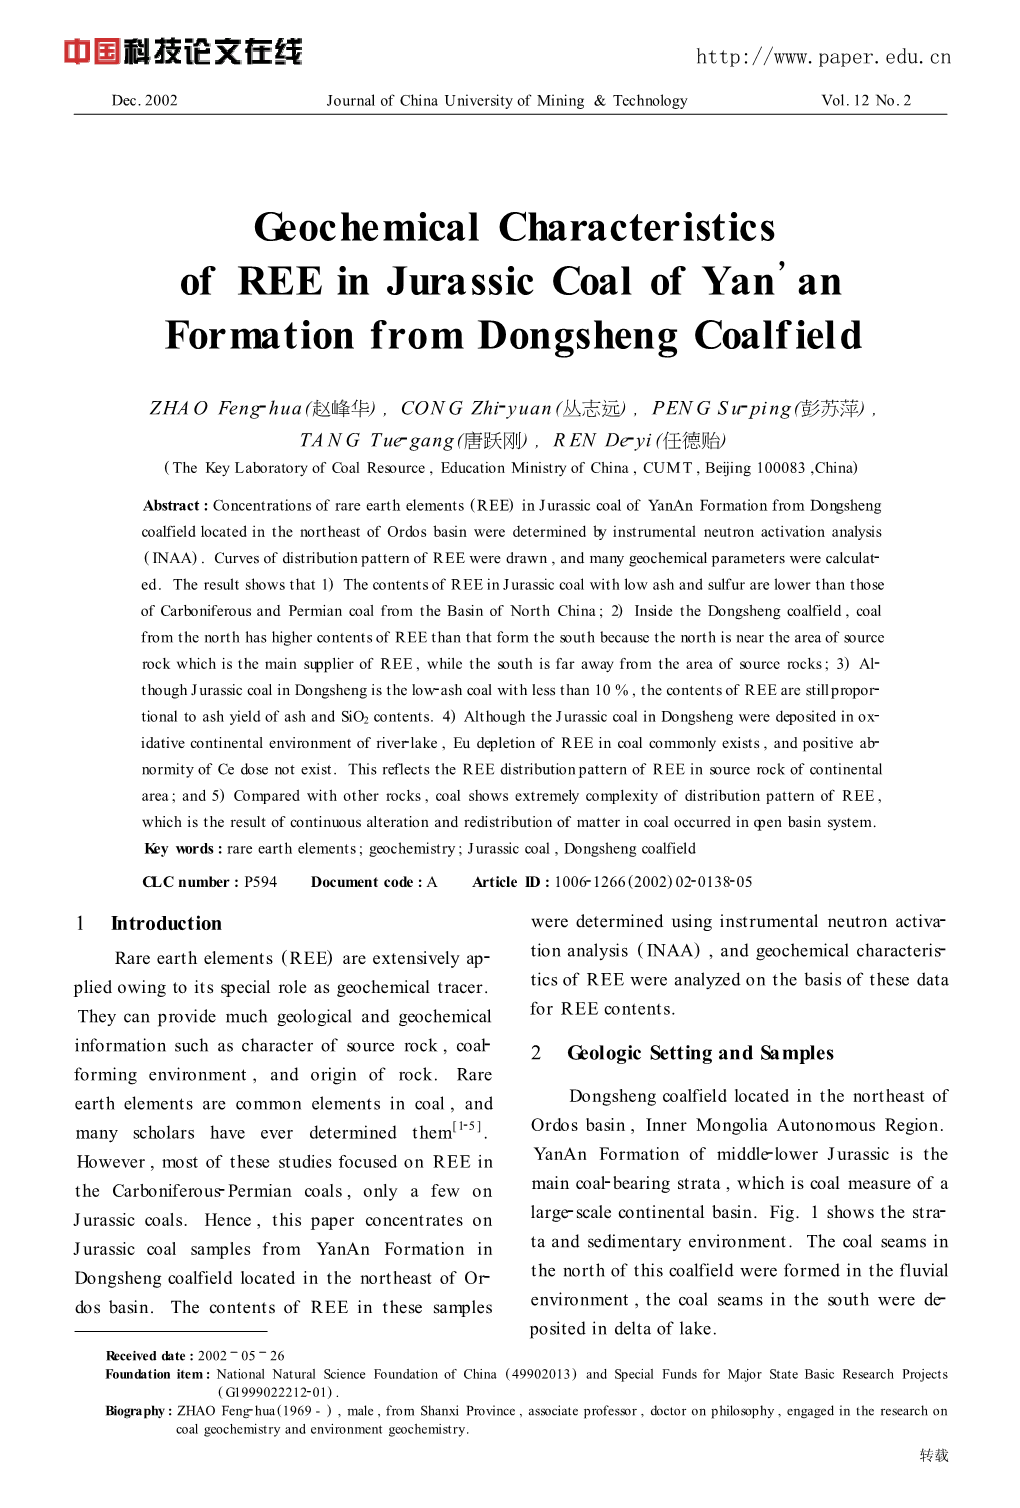 Geochemical Characteristics of REE in Jurassic Coal of Yan’An Formation from Dongsheng Coalf Ield